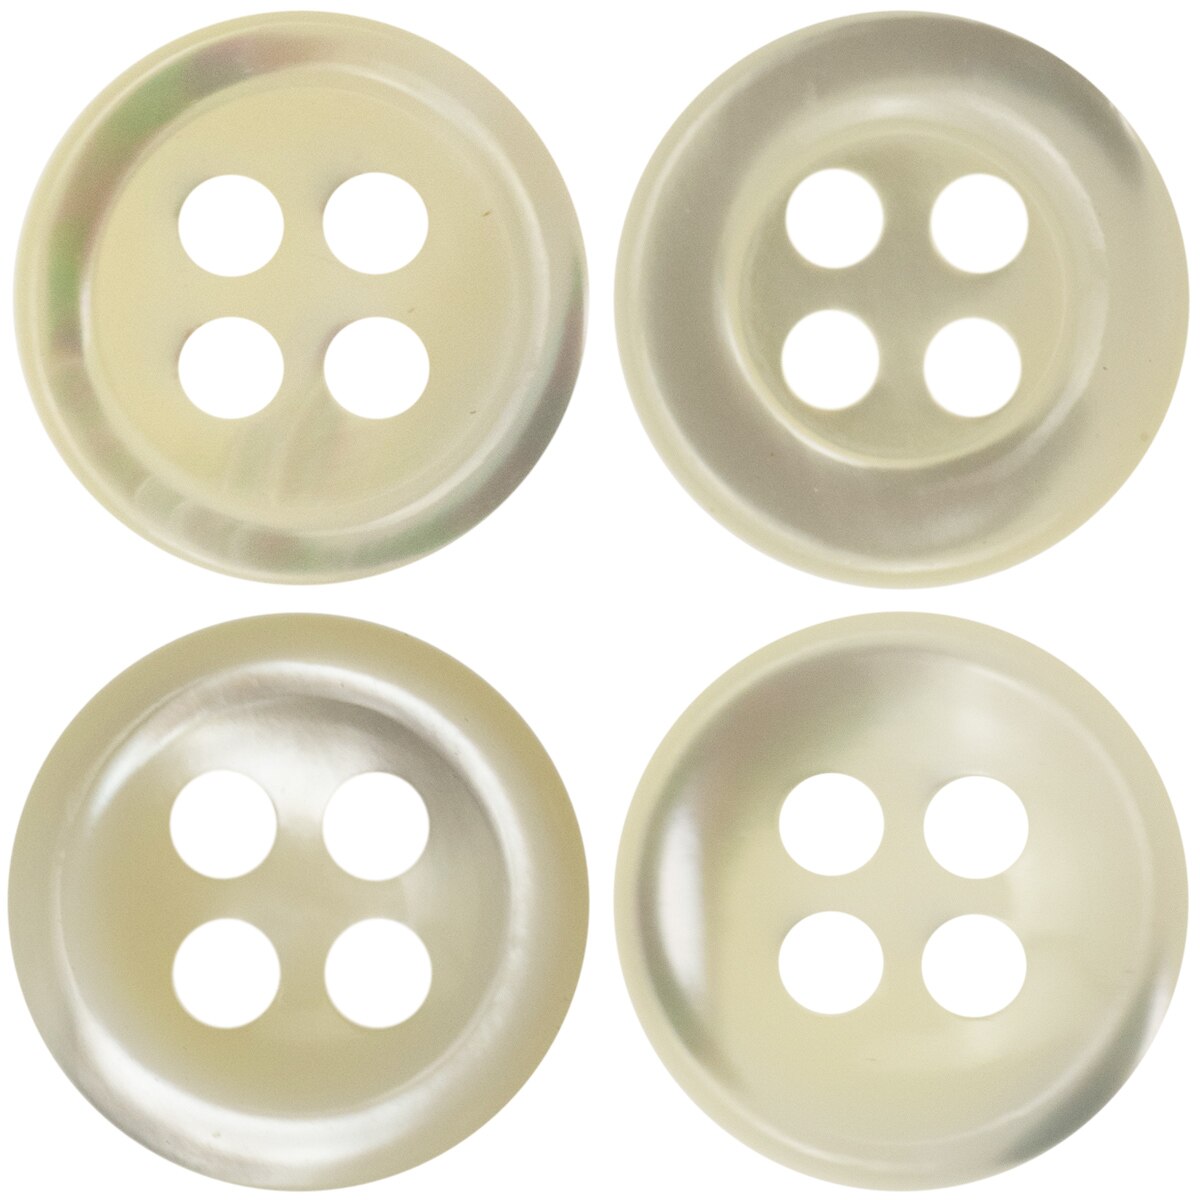 5pcs 2.65mm Thickness Trocas Shell Button in 4 Styles Natural Material Buttons